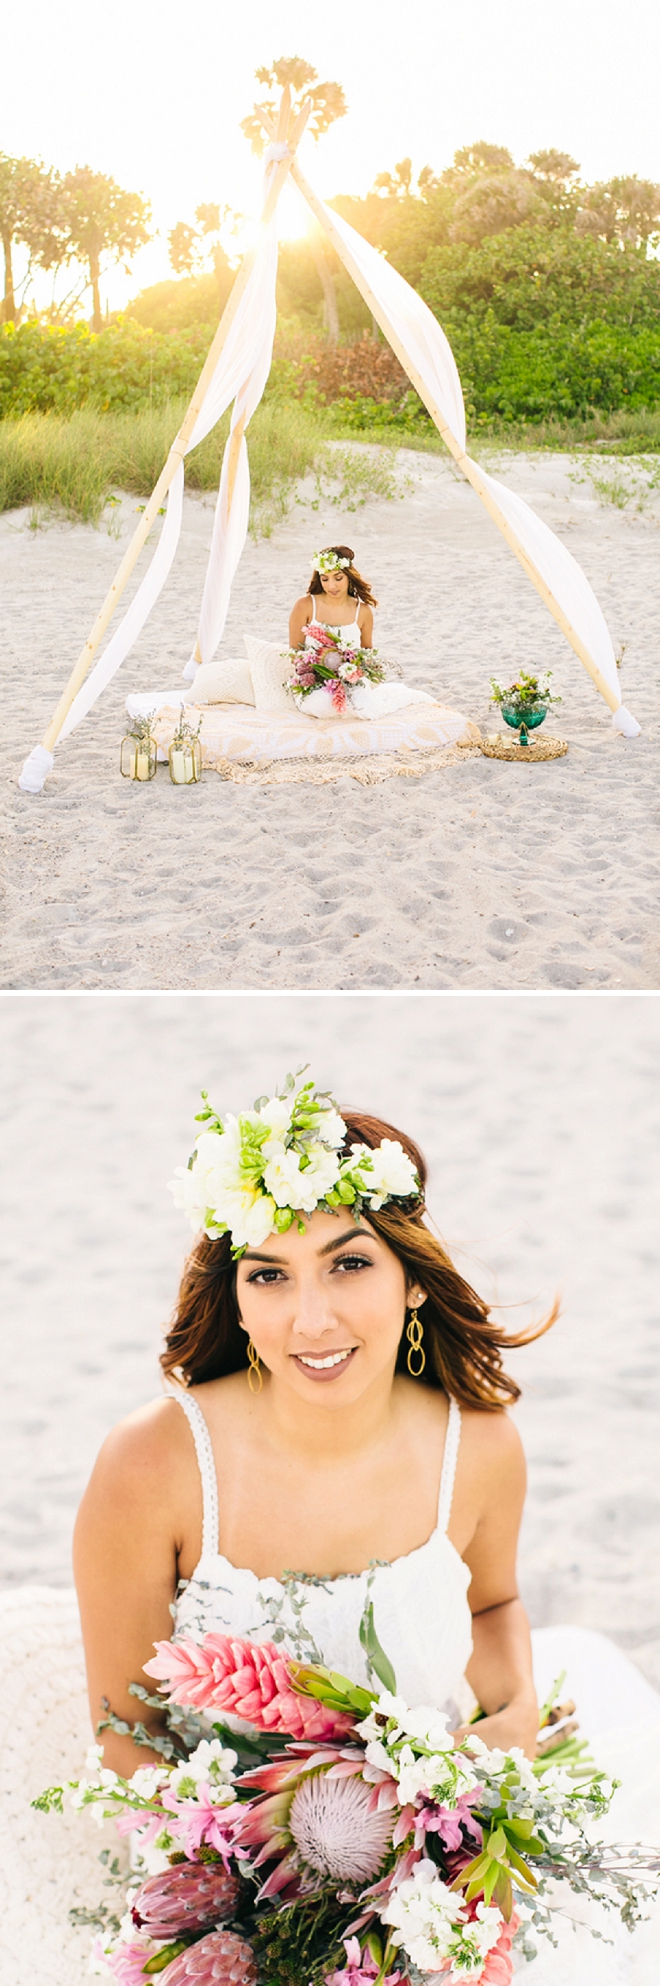 We're loving this gorgeous flower crown and boho beach anniversary shoot!